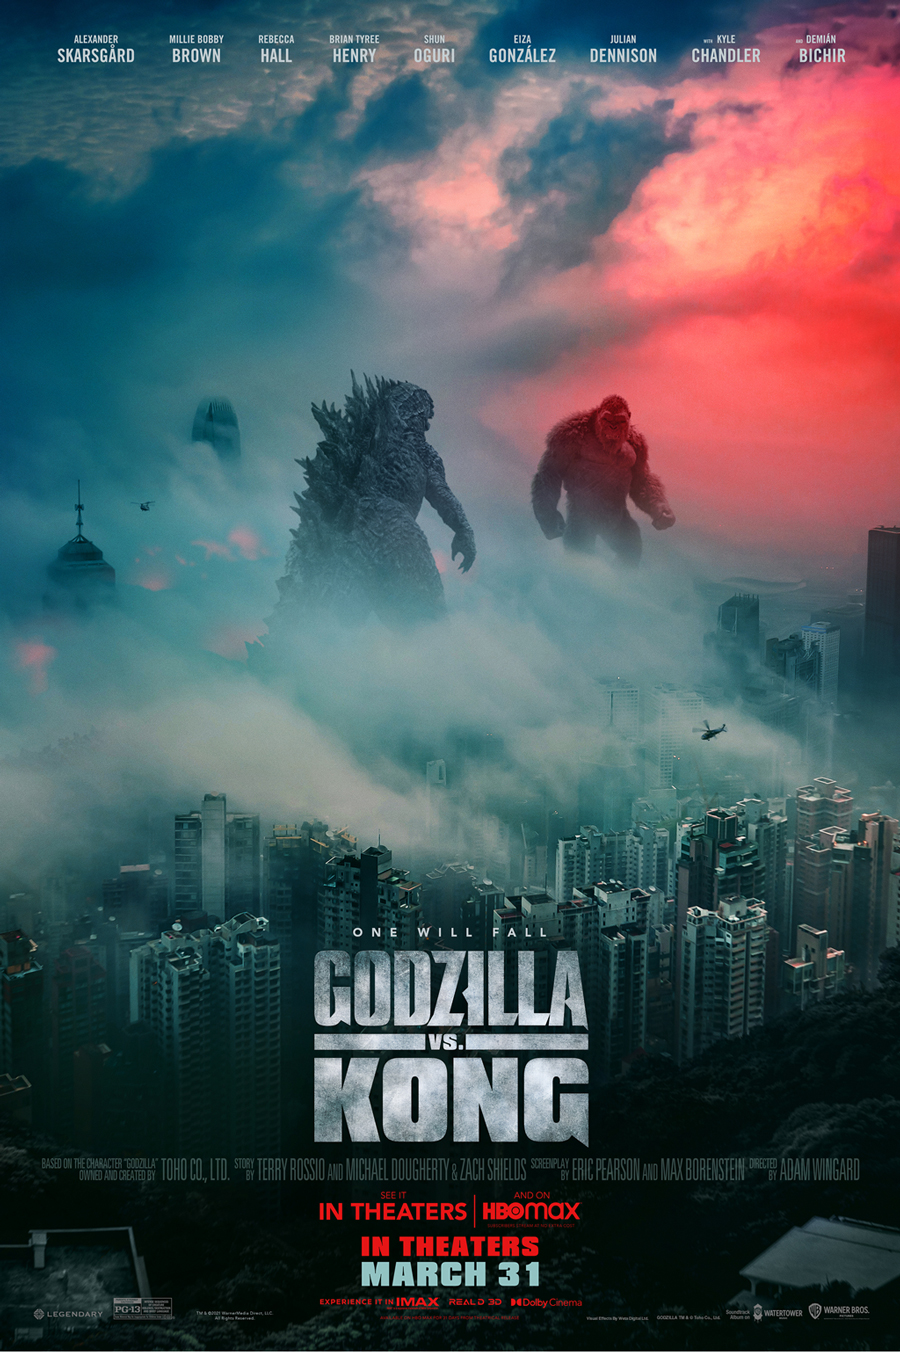 POSTER: Text reads "One will fall. Godzilla vs. Kong." Poster courtesy of Legendary Pictures and Warner Bros. Pictures. SOURCE: https://www.scifijapan.com/articles/2021/03/04/new-godzilla-vs-kong-poster-from-warner-bros/